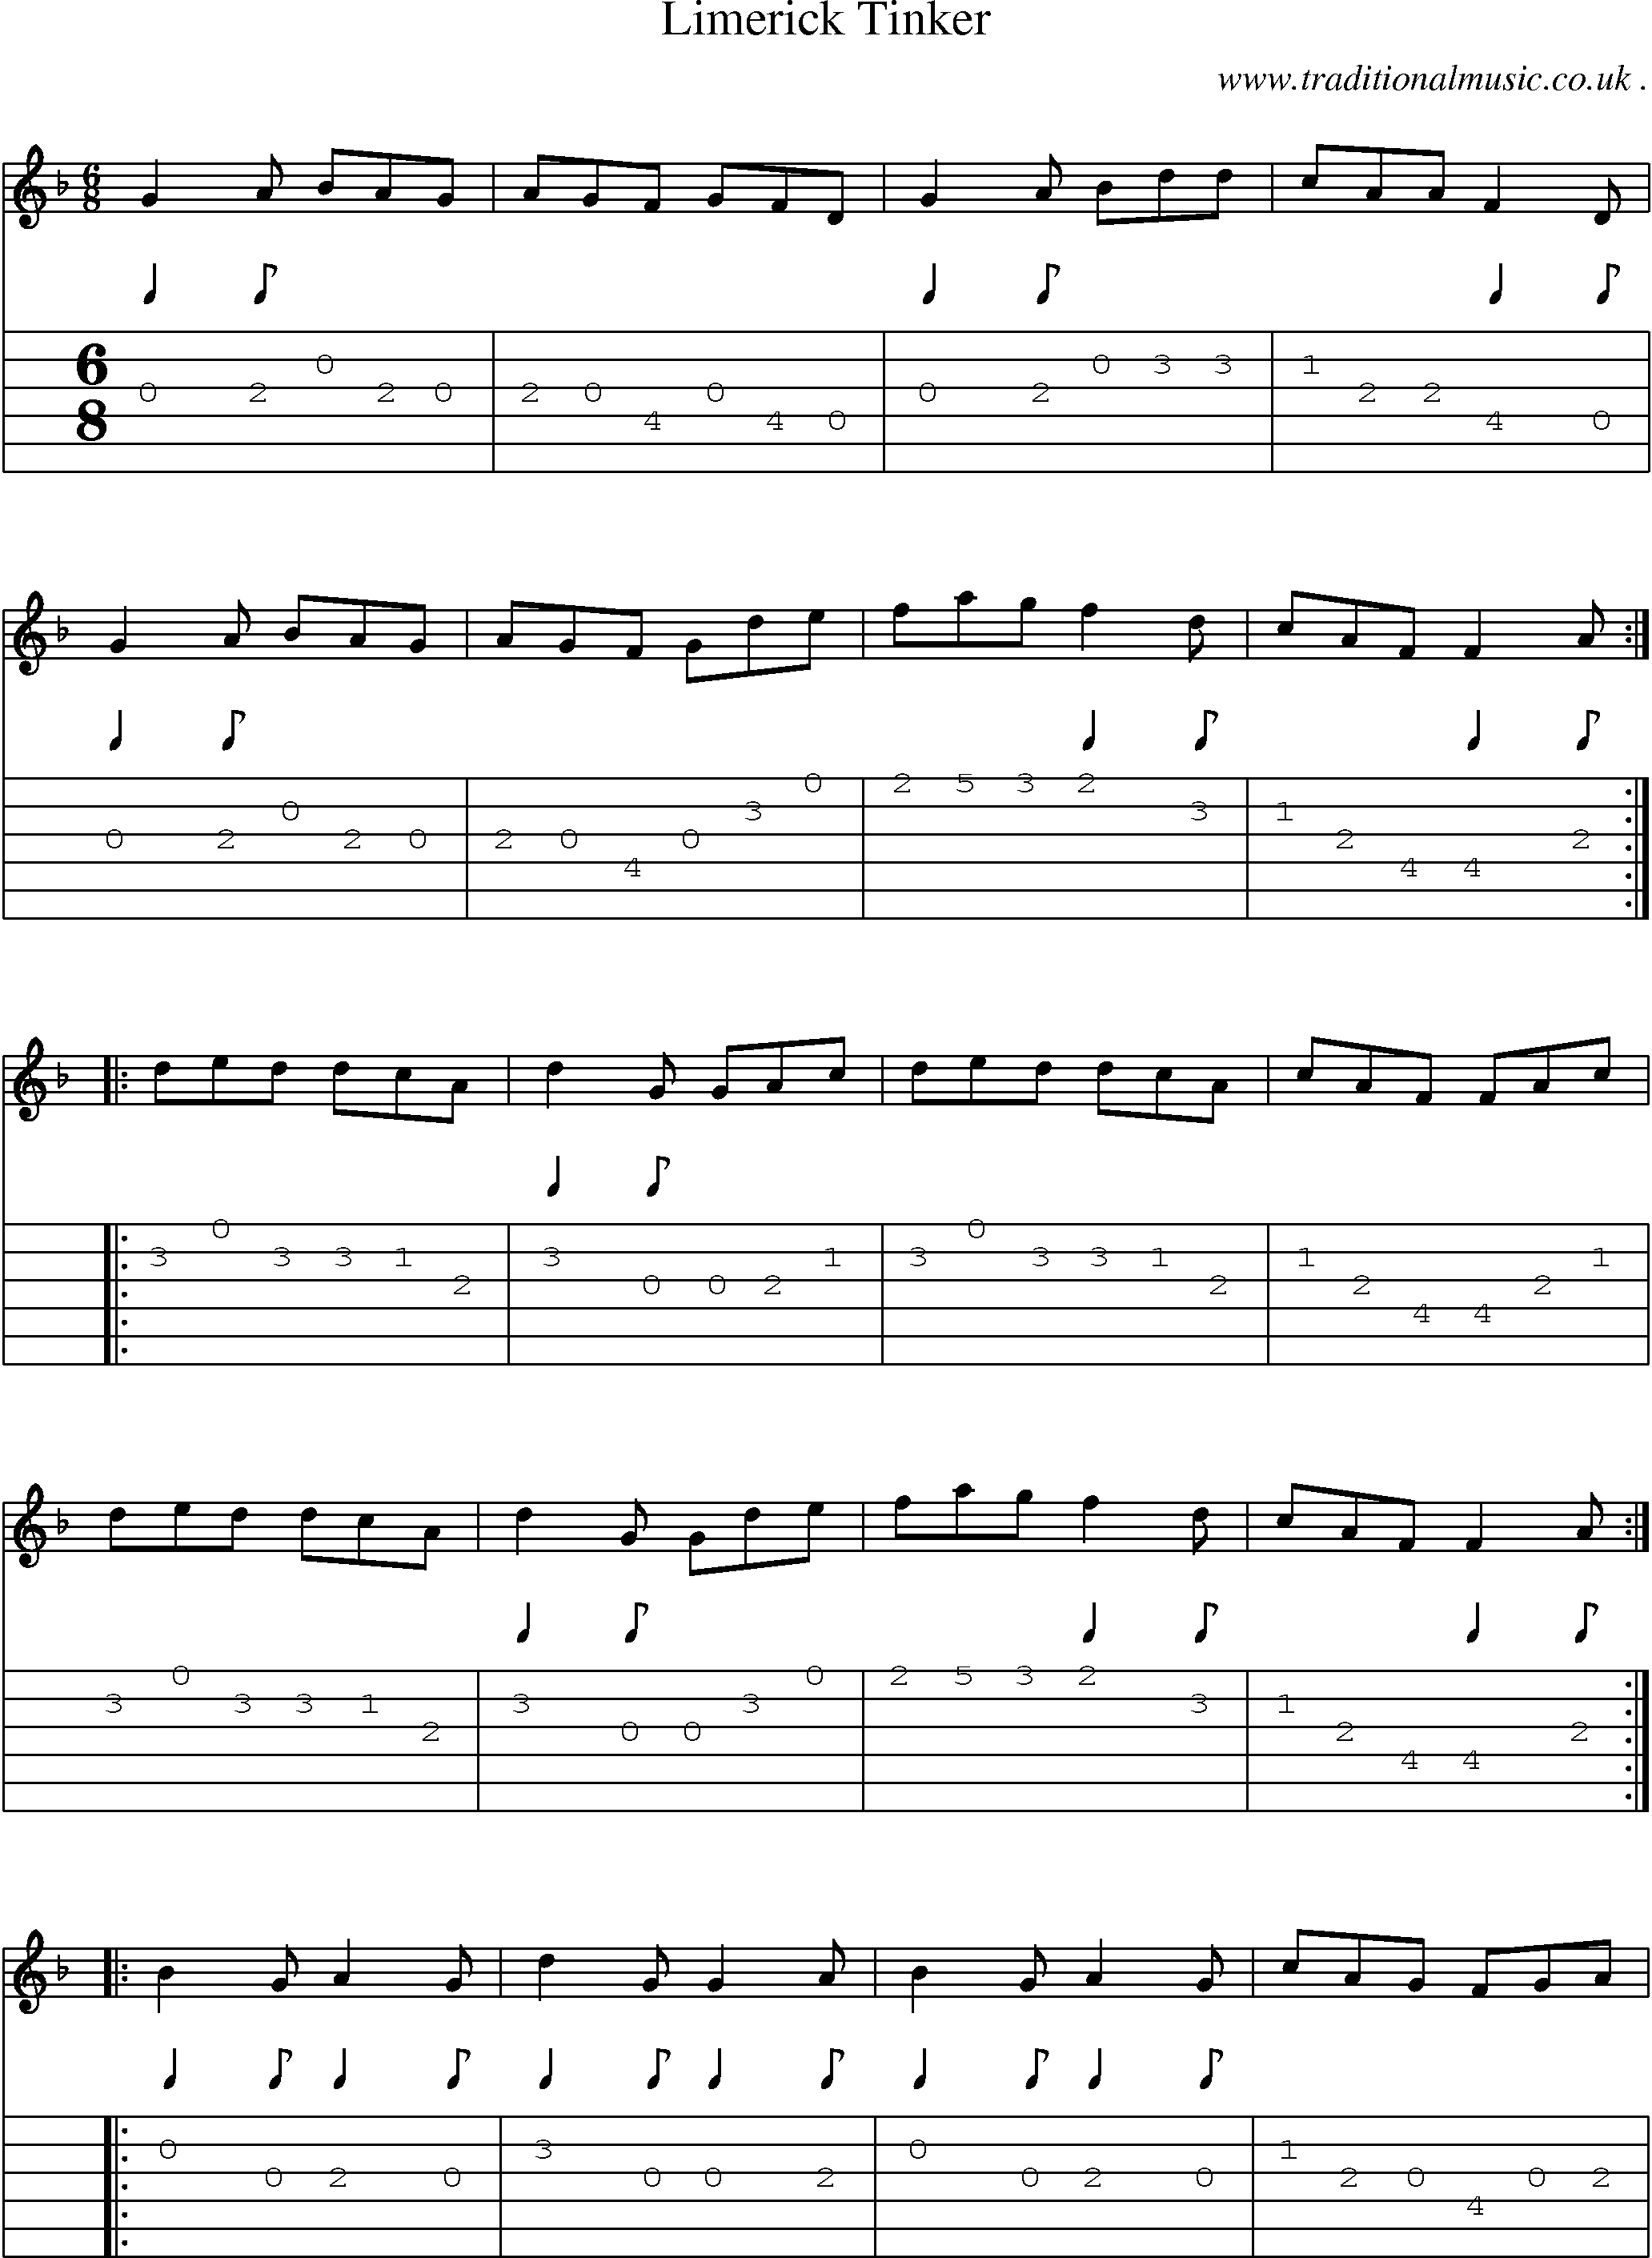 Sheet-Music and Guitar Tabs for Limerick Tinker